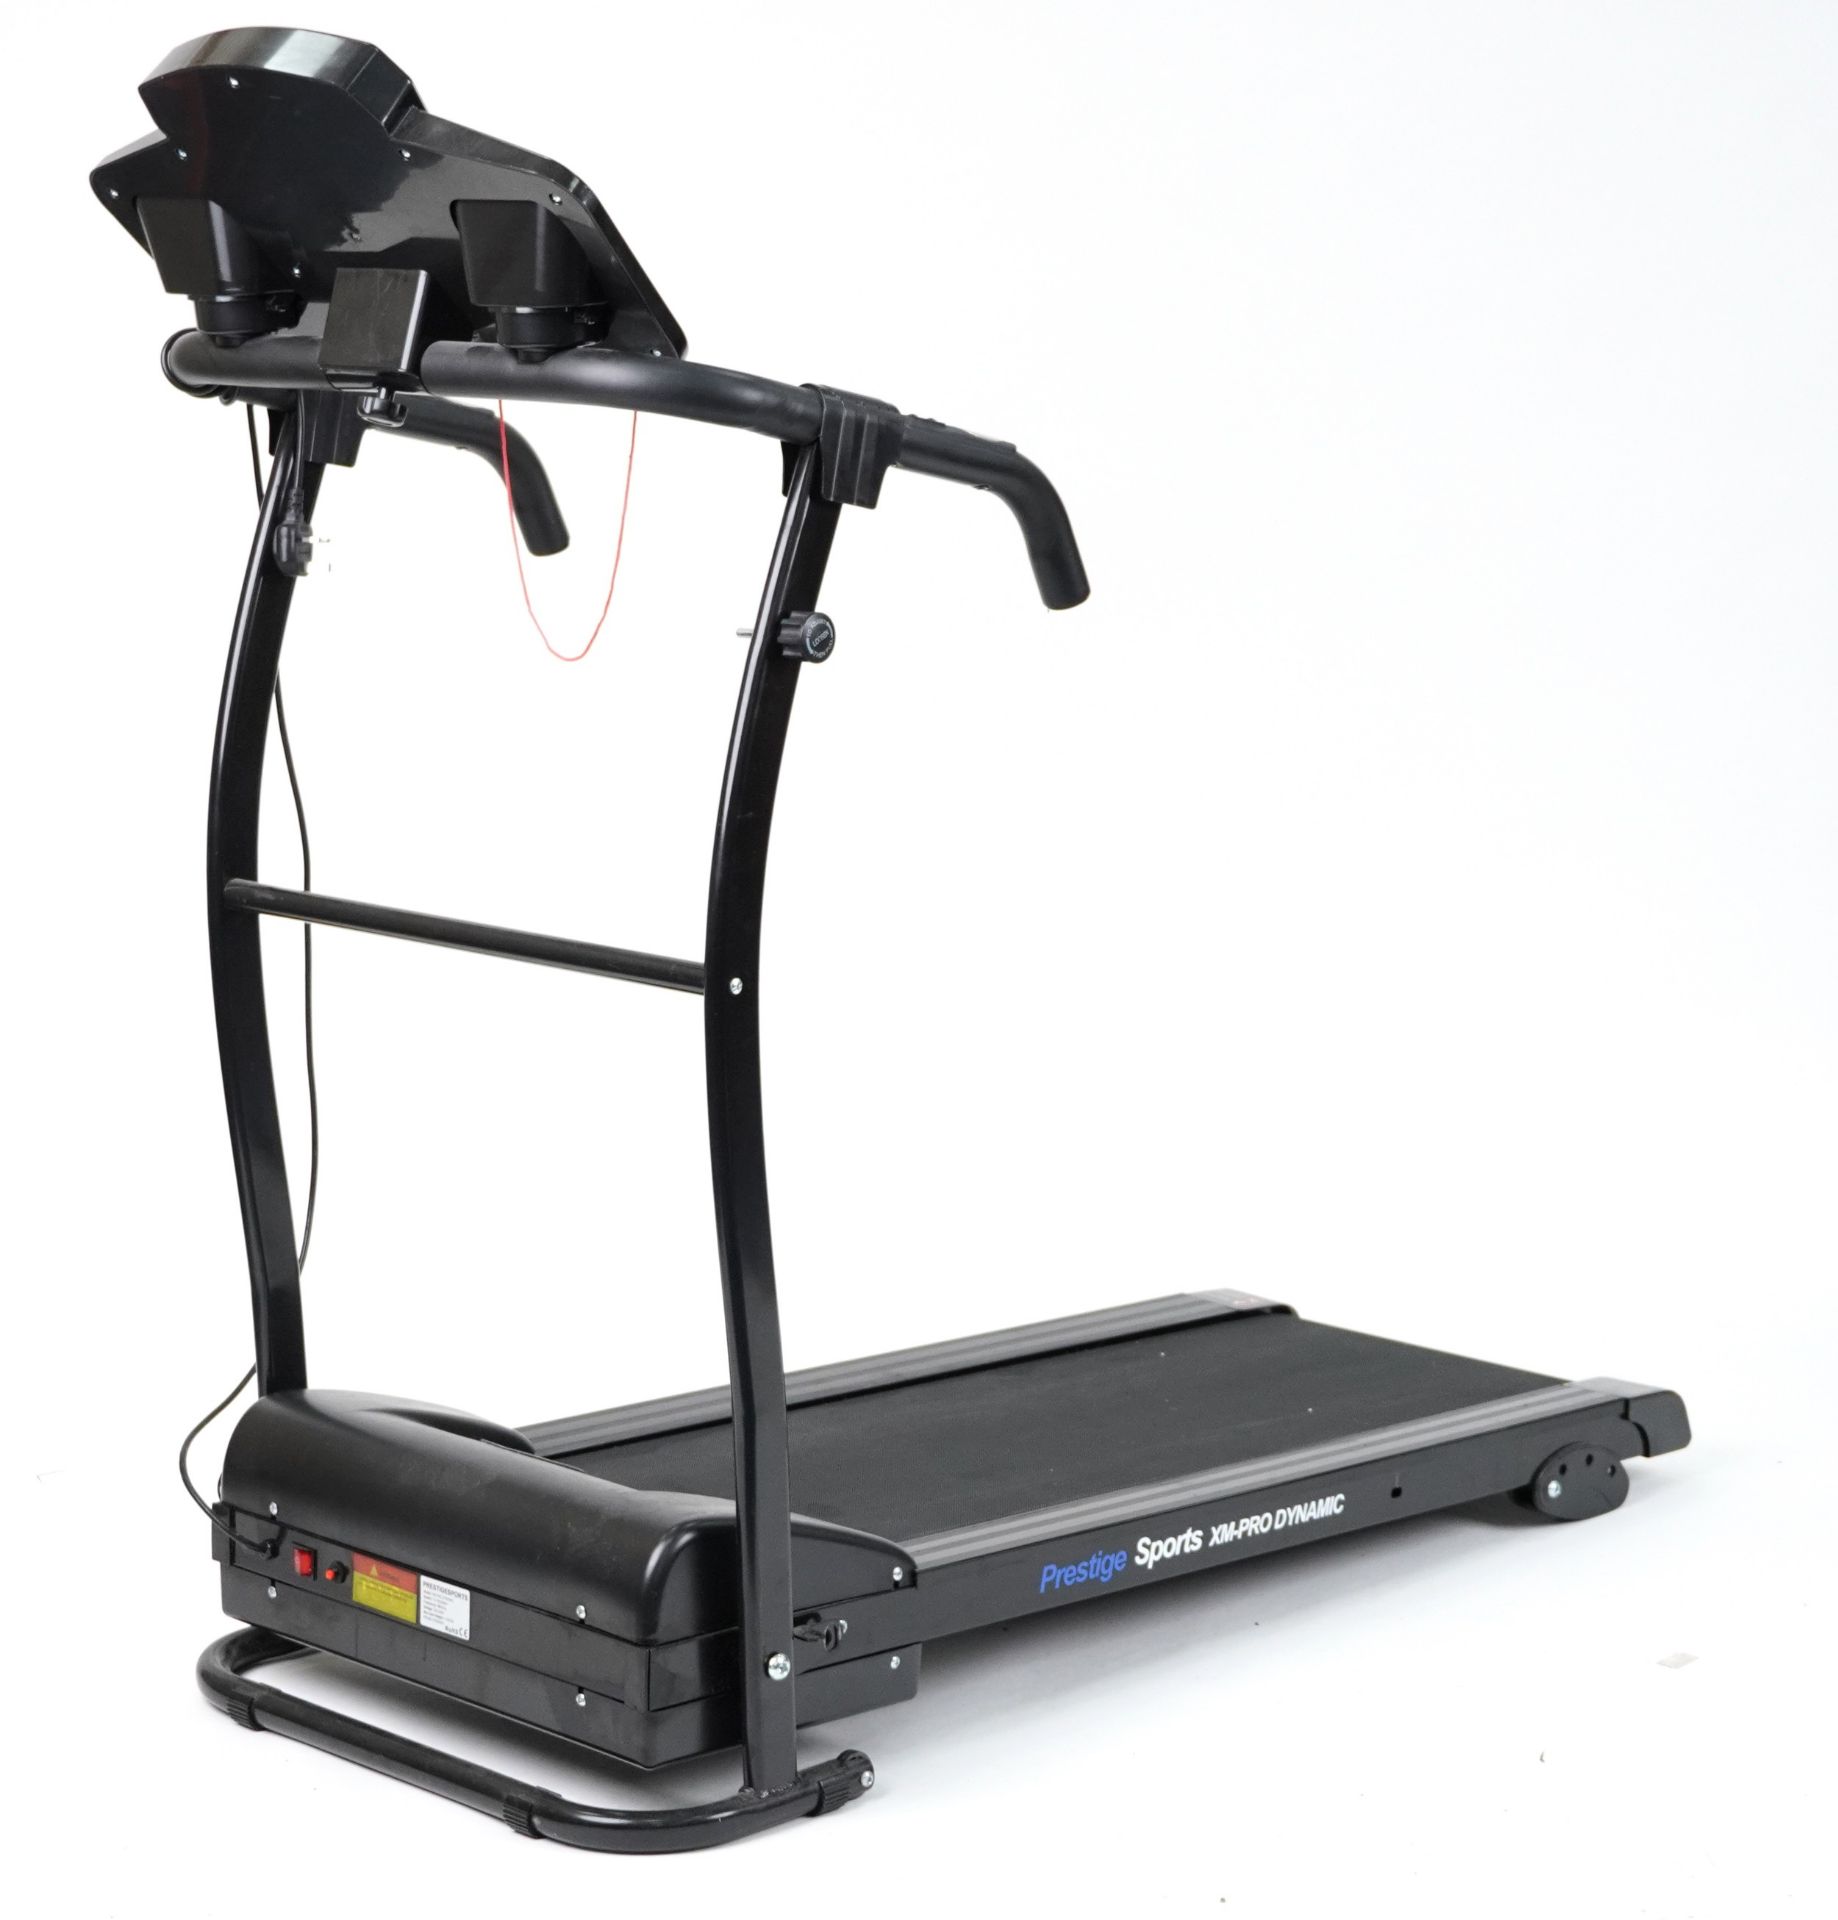 Prestige Sports XM-Pro Dynamic treadmill : For further information on this lot please visit www. - Image 2 of 2